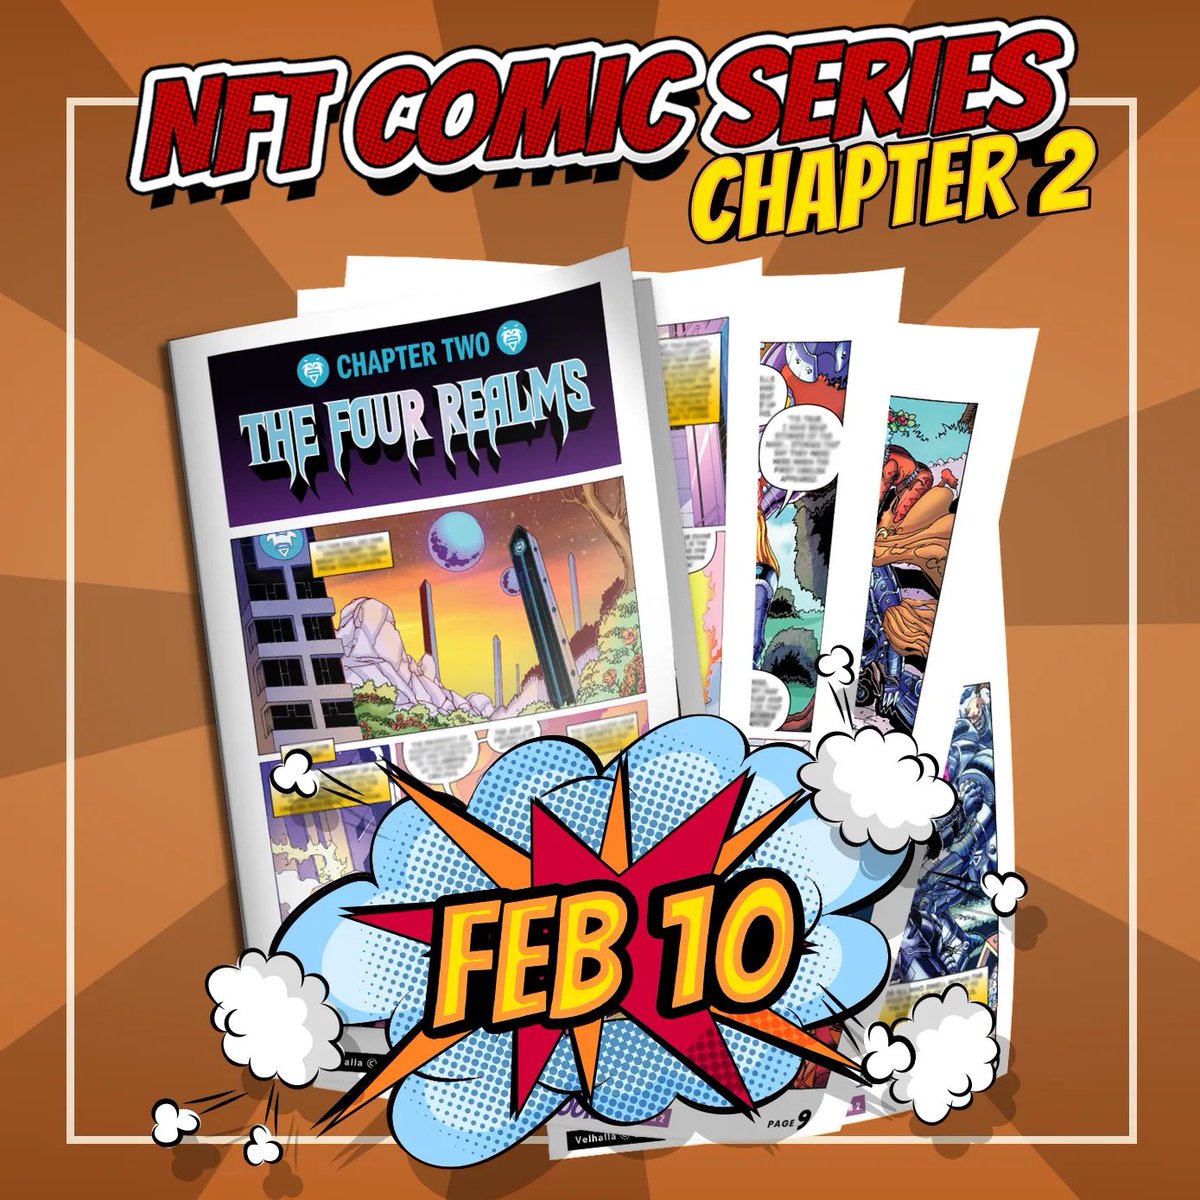 ⚔️Warriors of Velhalla!!!! 
Chapter two of the the official nft comic book series drops on Friday feb 10th. 🤯 The first drop sold out in 1 day so mark your calendars! You DO NOT want to miss this opportunity 😉 
#readthestory #extraperks #velas #metaverse #NFTs 🏆🦍